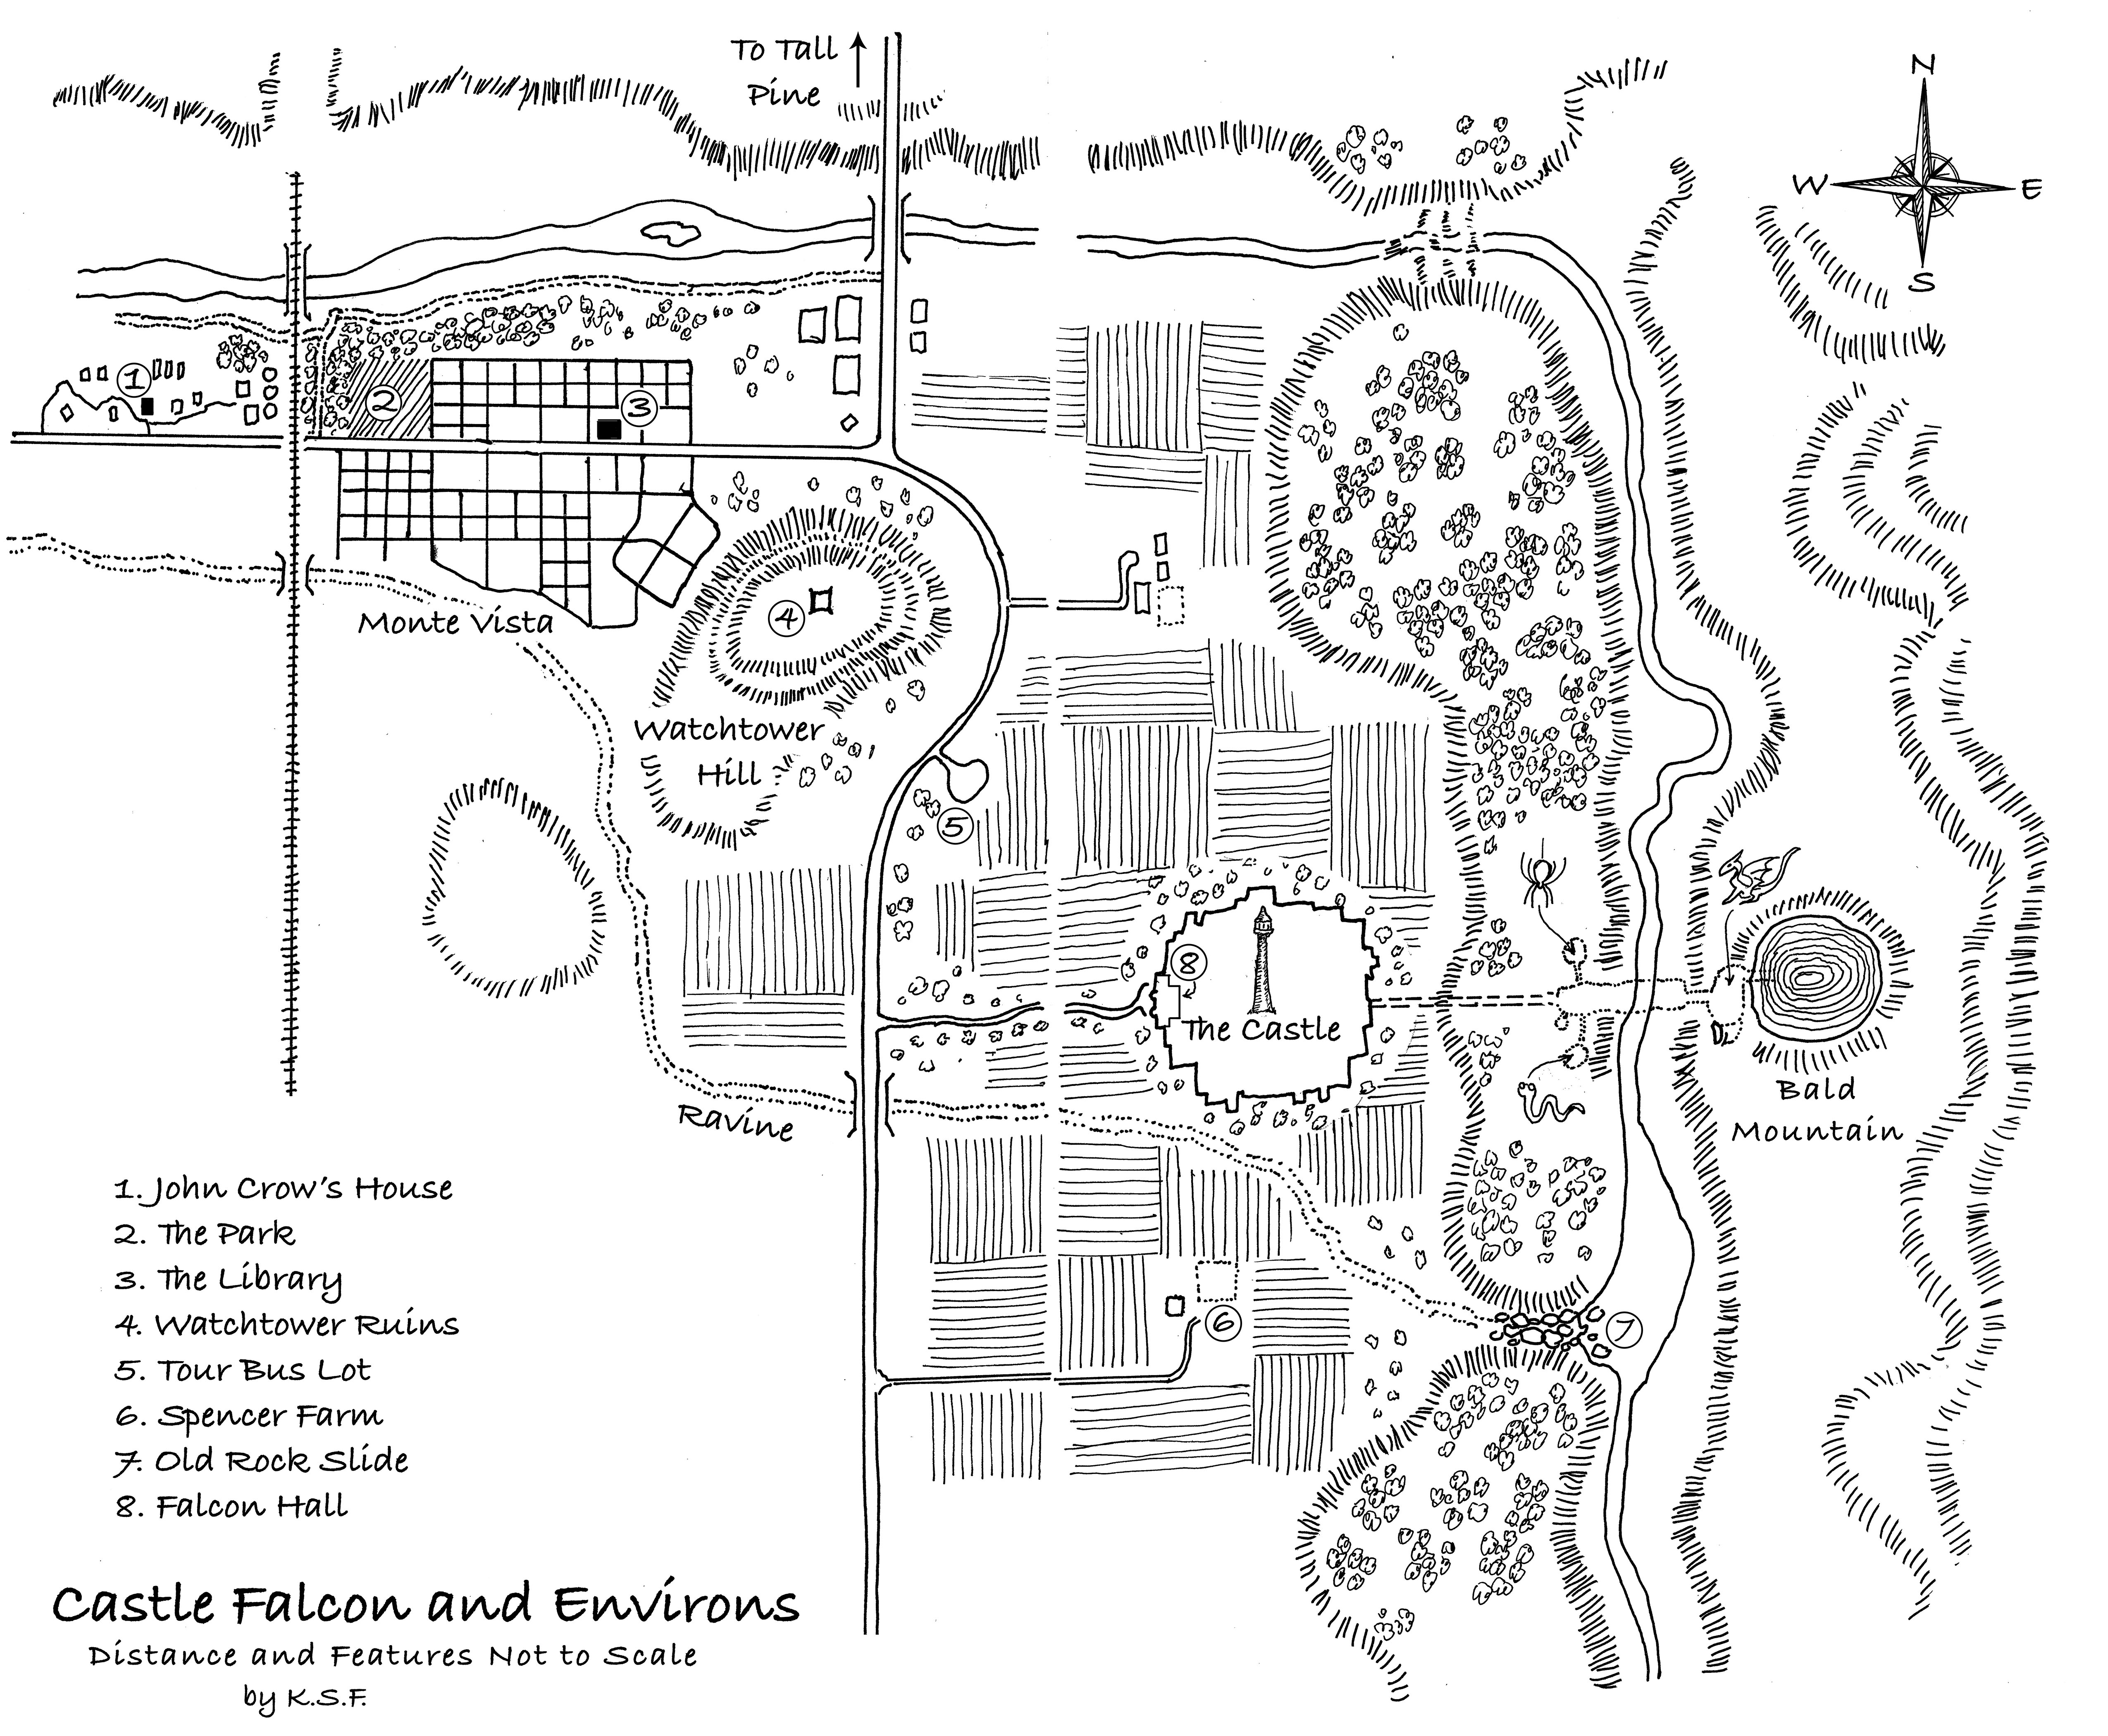 Map of Castle Falcon and Environs